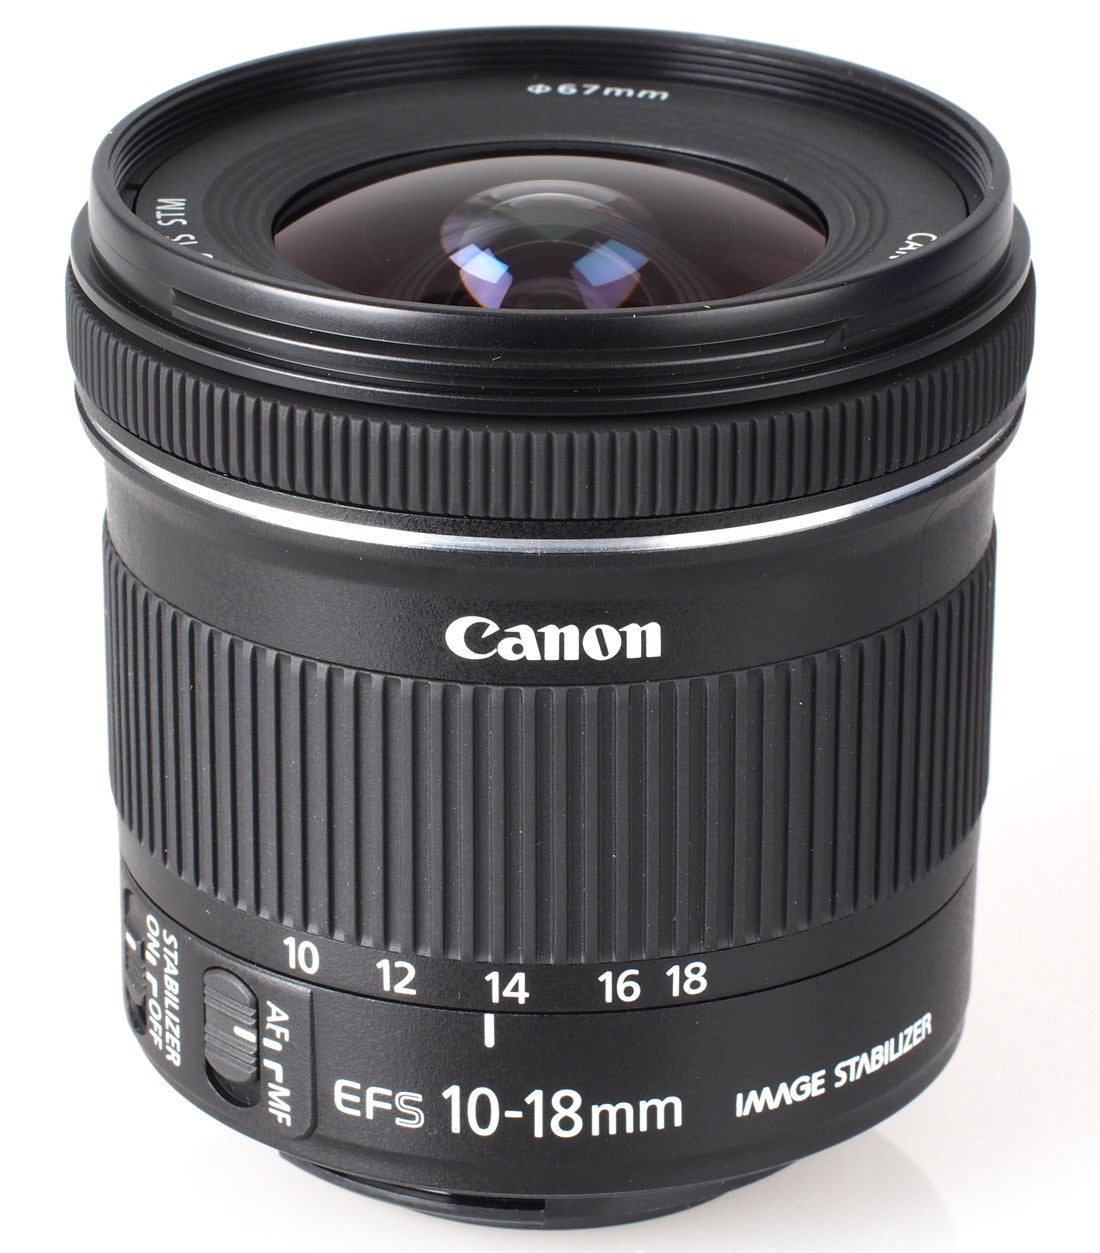 Canon EF-S 10-18mm f4.5-5-6 IS STM Lens - Product Photo 1 - Top down perspective with emphasis on the focus ring and glass components